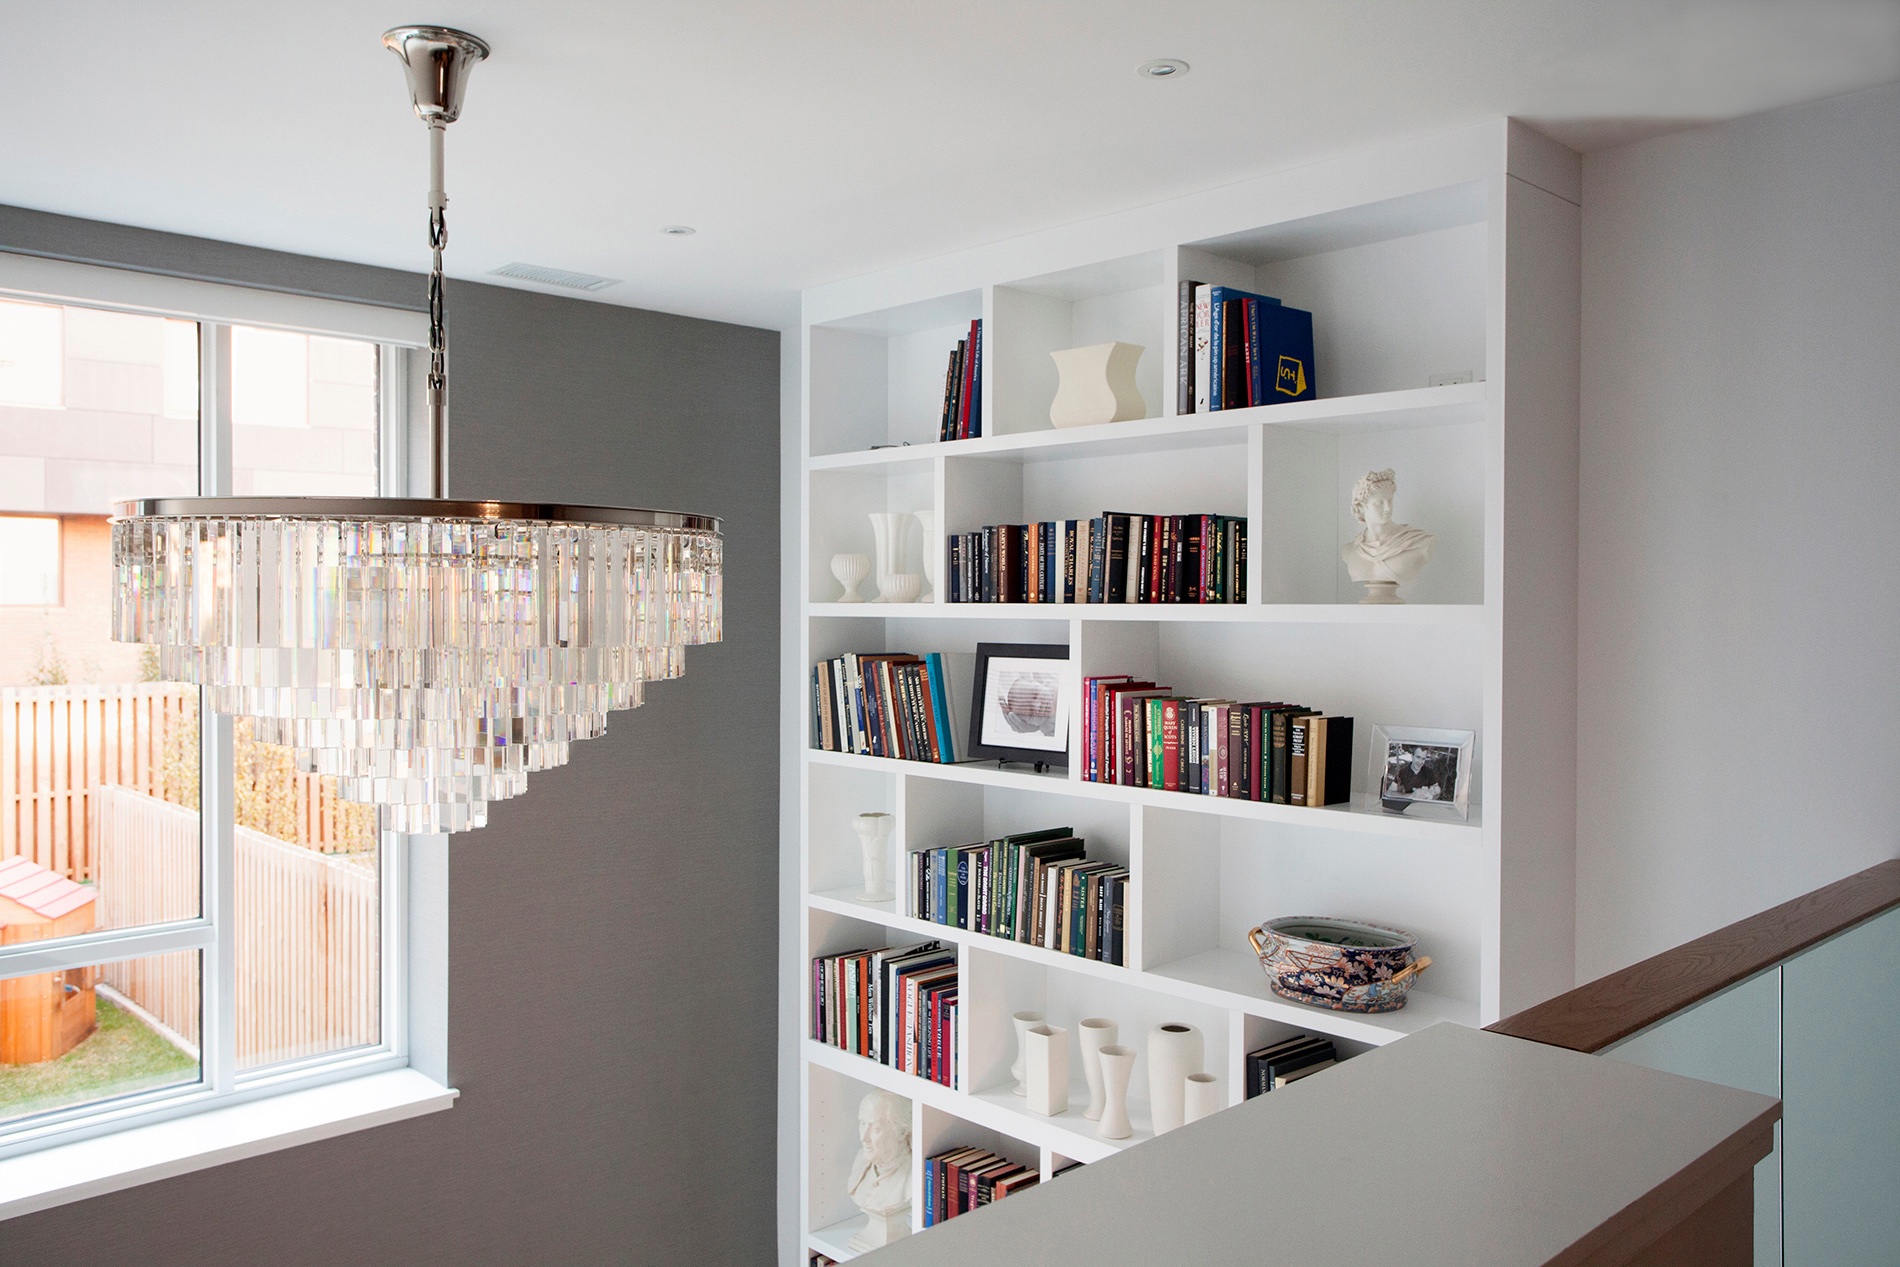 Bookshelf and Home Library Designs to Try in the Hudson Valley